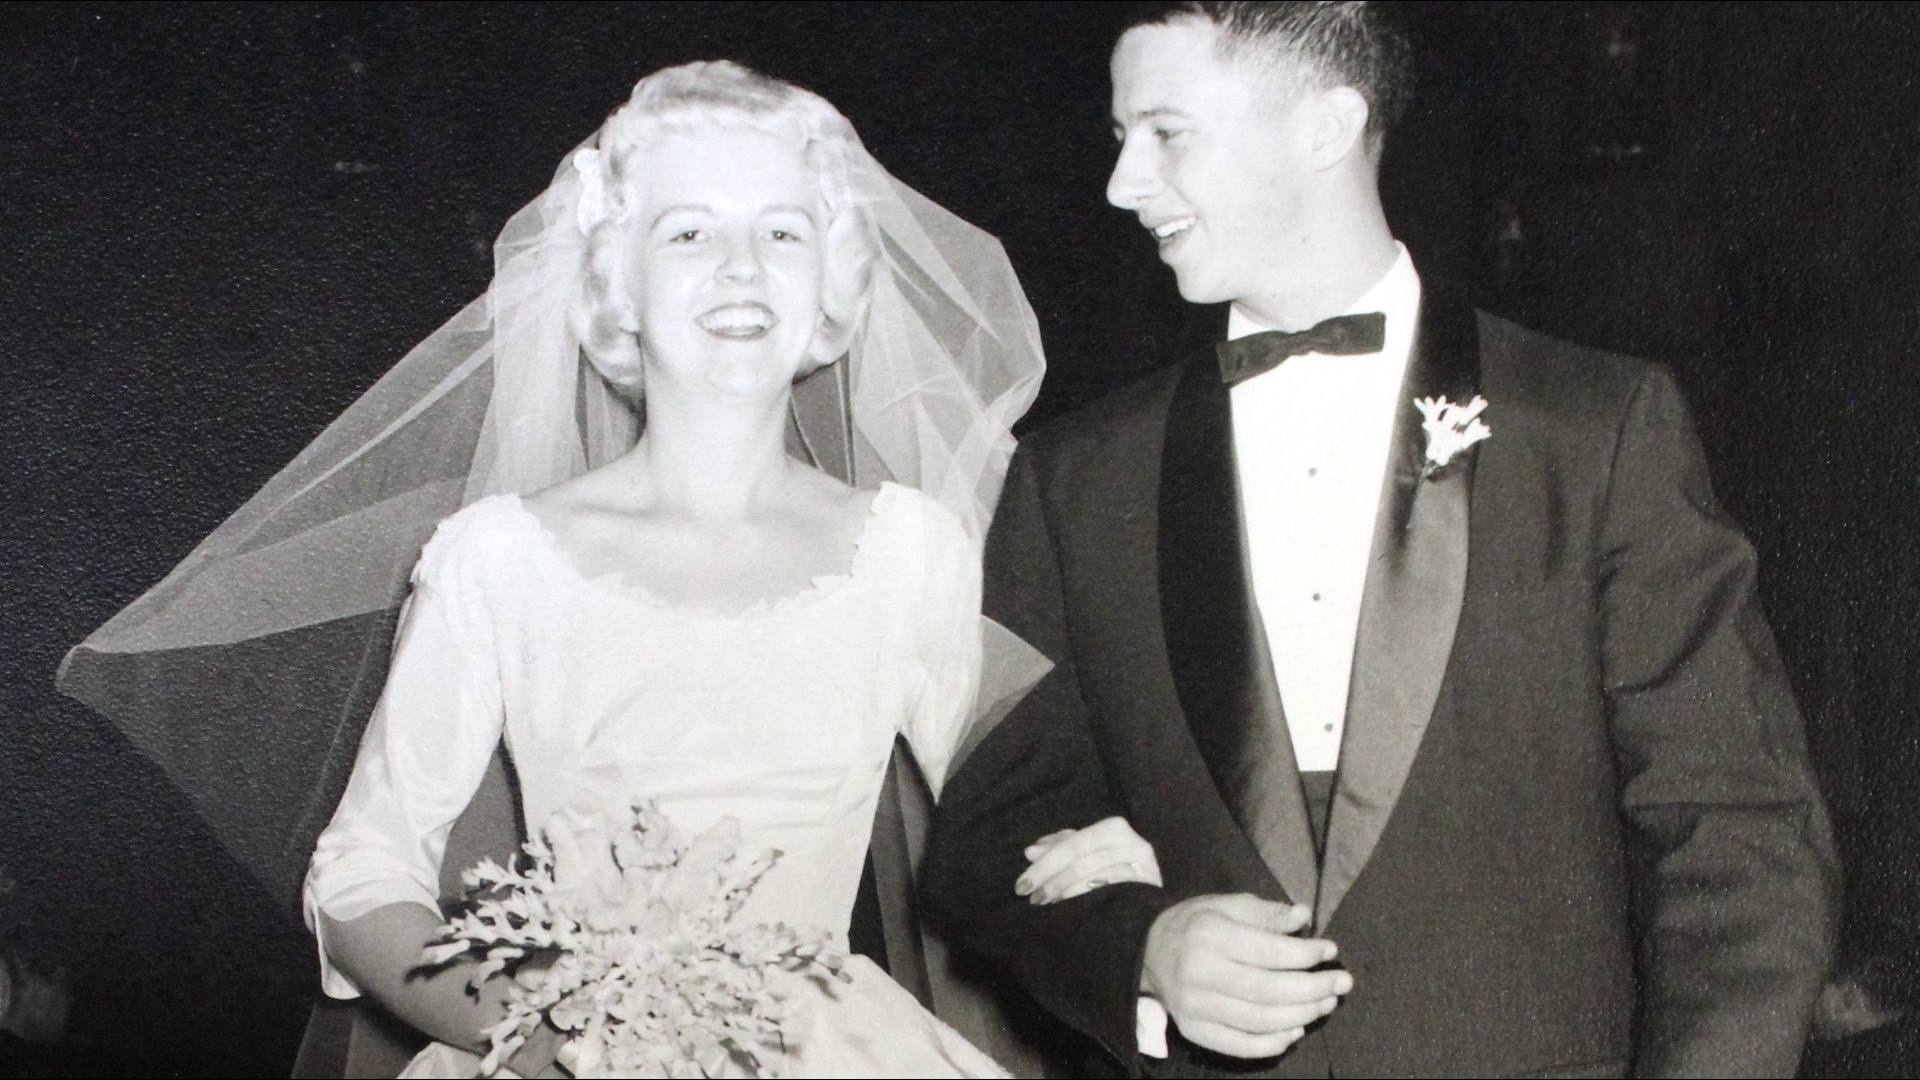 George and Sally Kelby met in 1952. Joe and Gwen Ladner: 1959. Here are their stories.